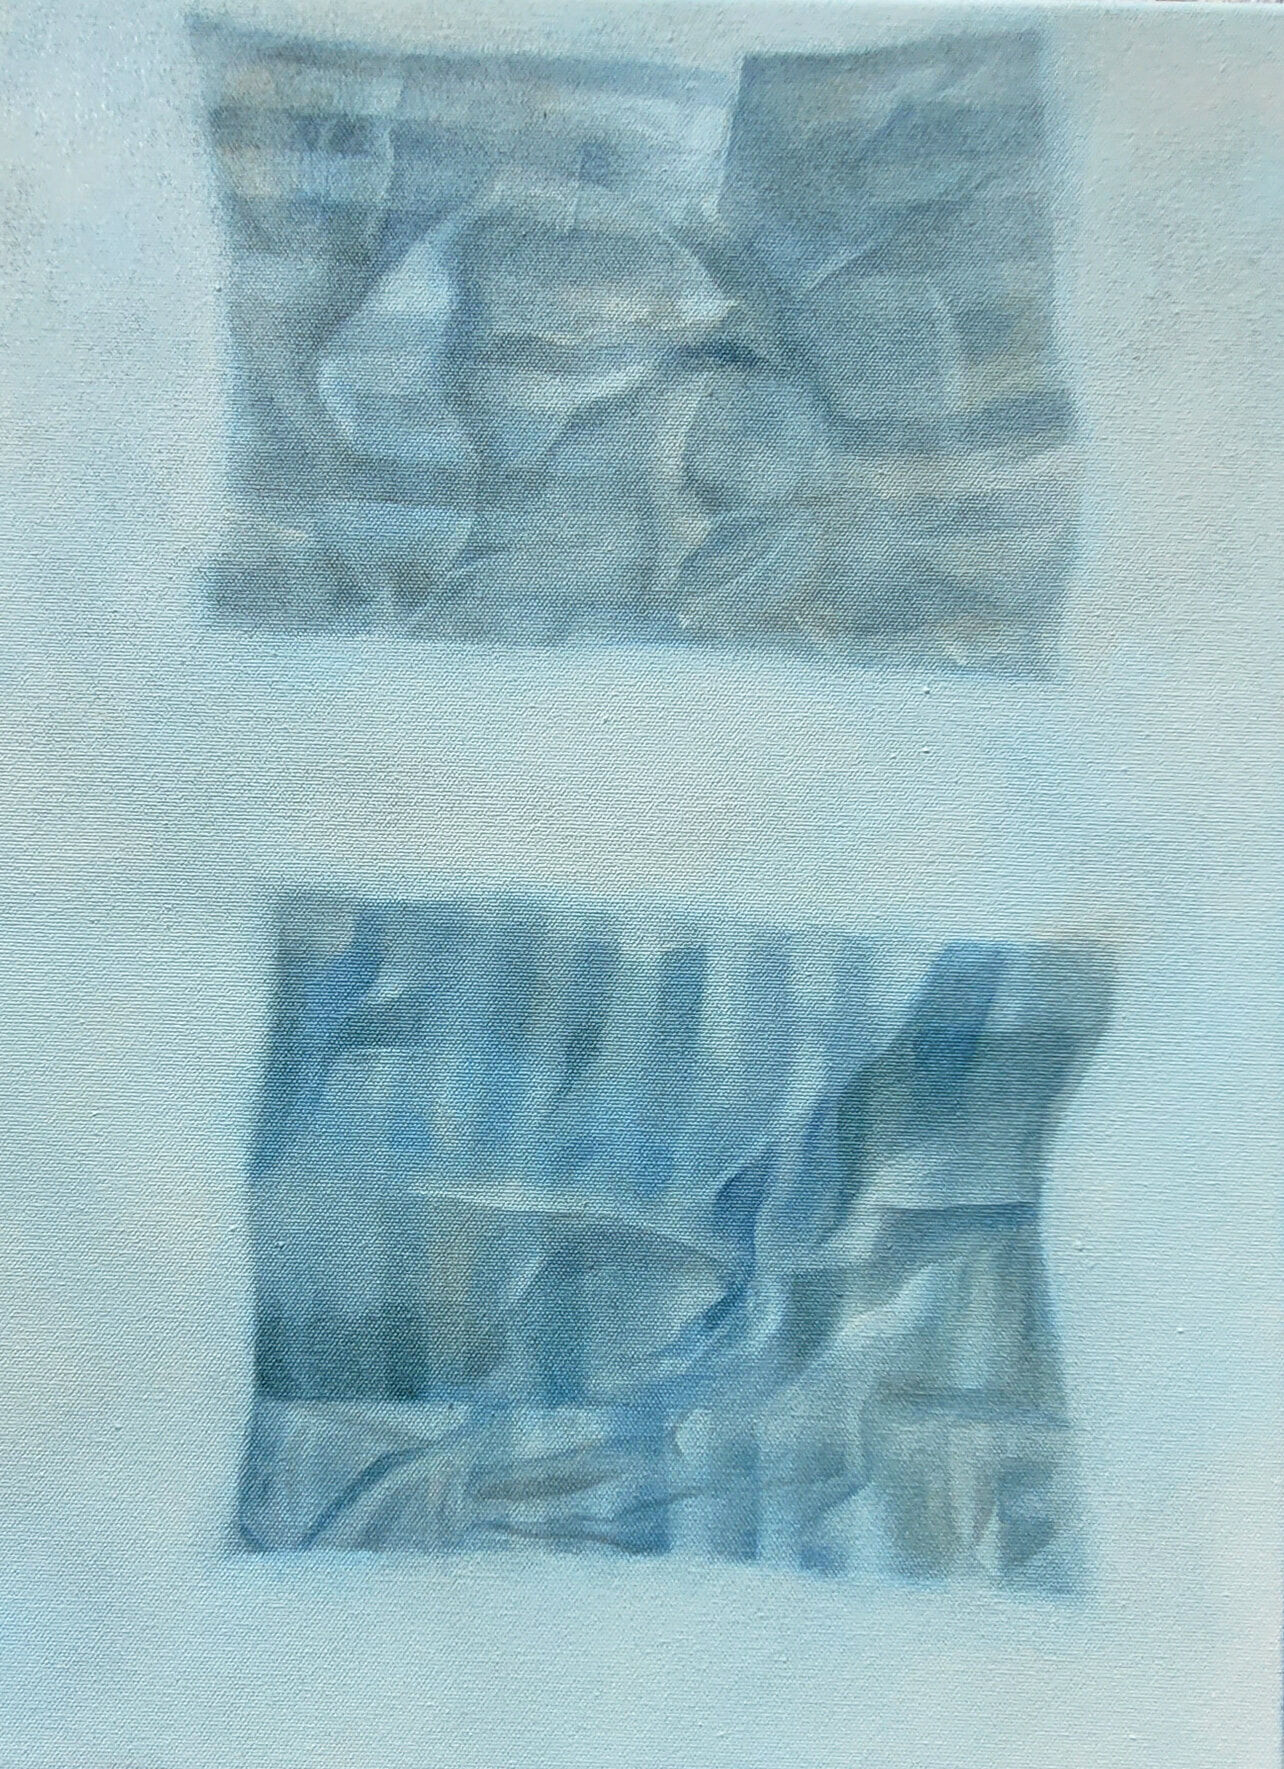 Two Pieces_2023_oil on canvas_40 x 30 cms_$1600